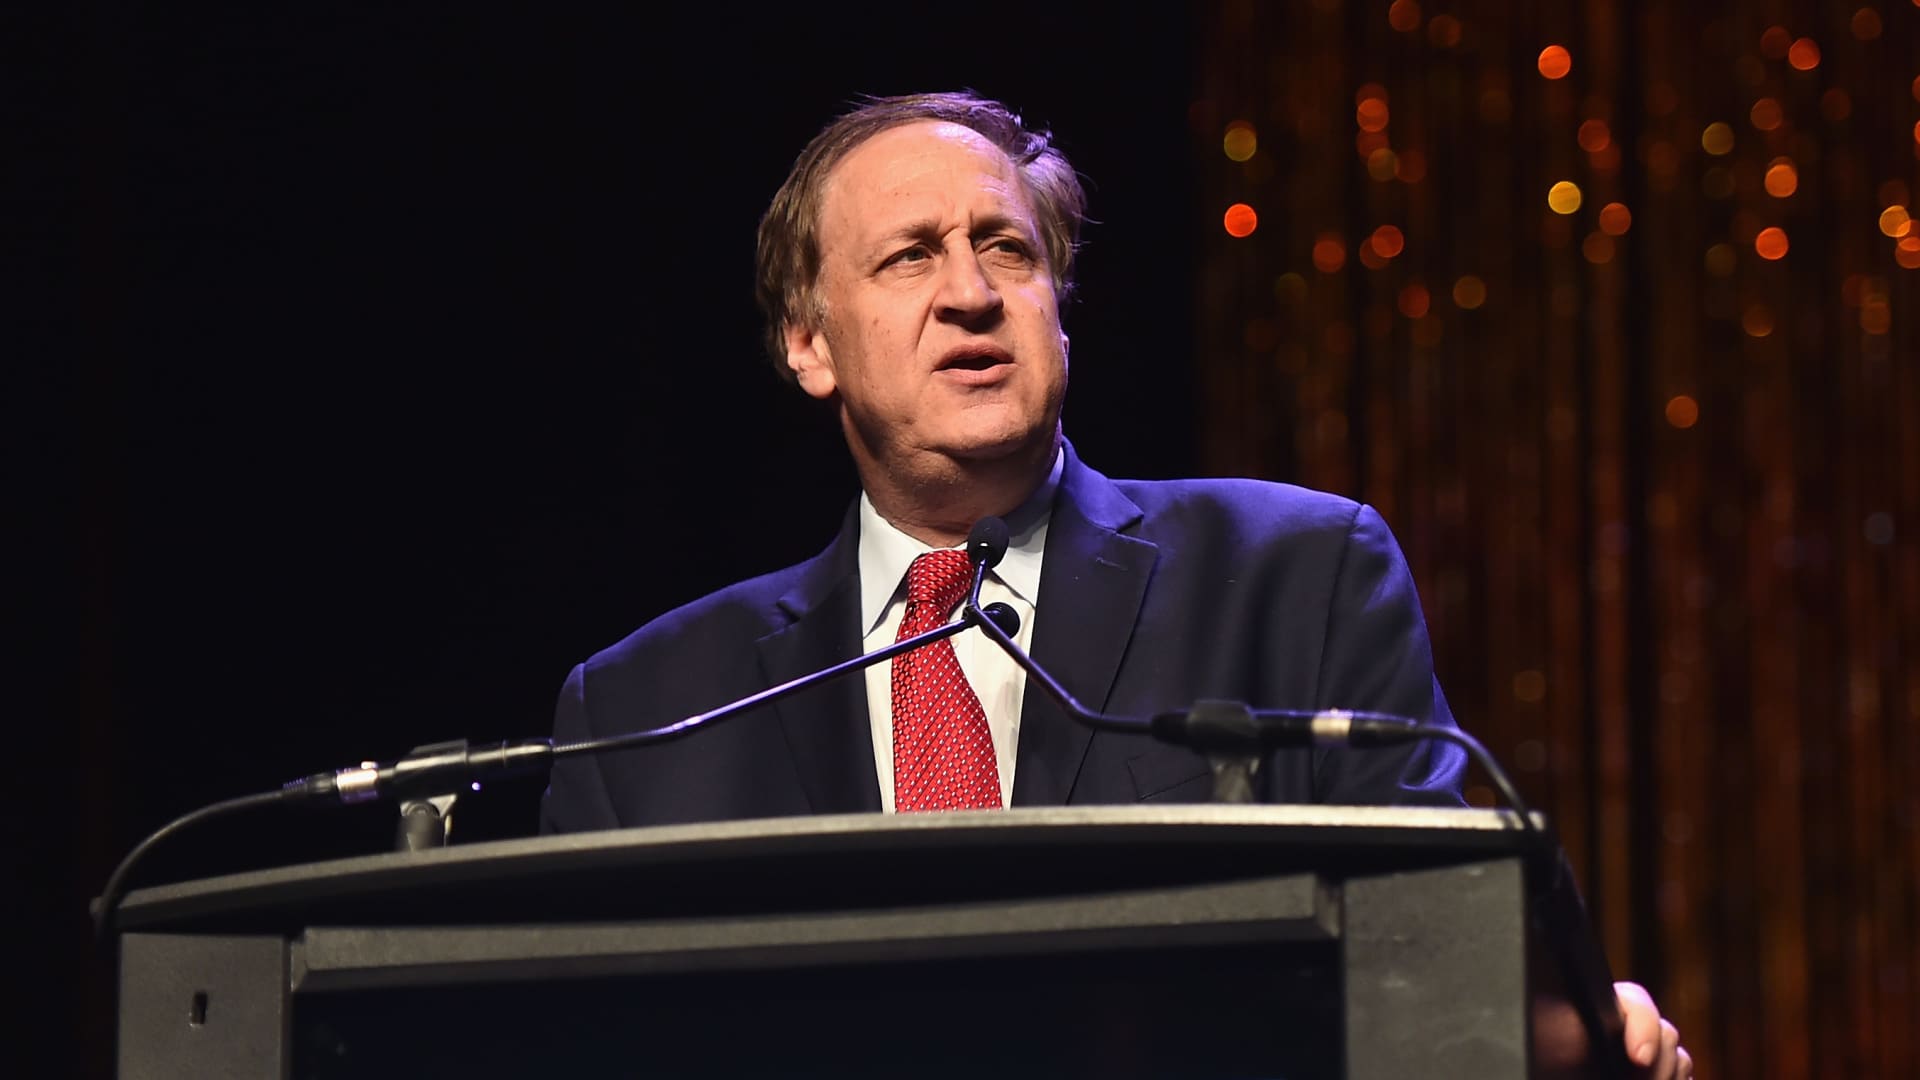 Chairman/CEO of AMC Entertainment Inc. Adam Aron speaks onstage during the 2018 Will Rogers Pioneer of the Year Dinner at Caesars Palace during CinemaCon, the official convention of the National Association of Theatre Owners, on April 25, 2018 in Las Vegas, Nevada.